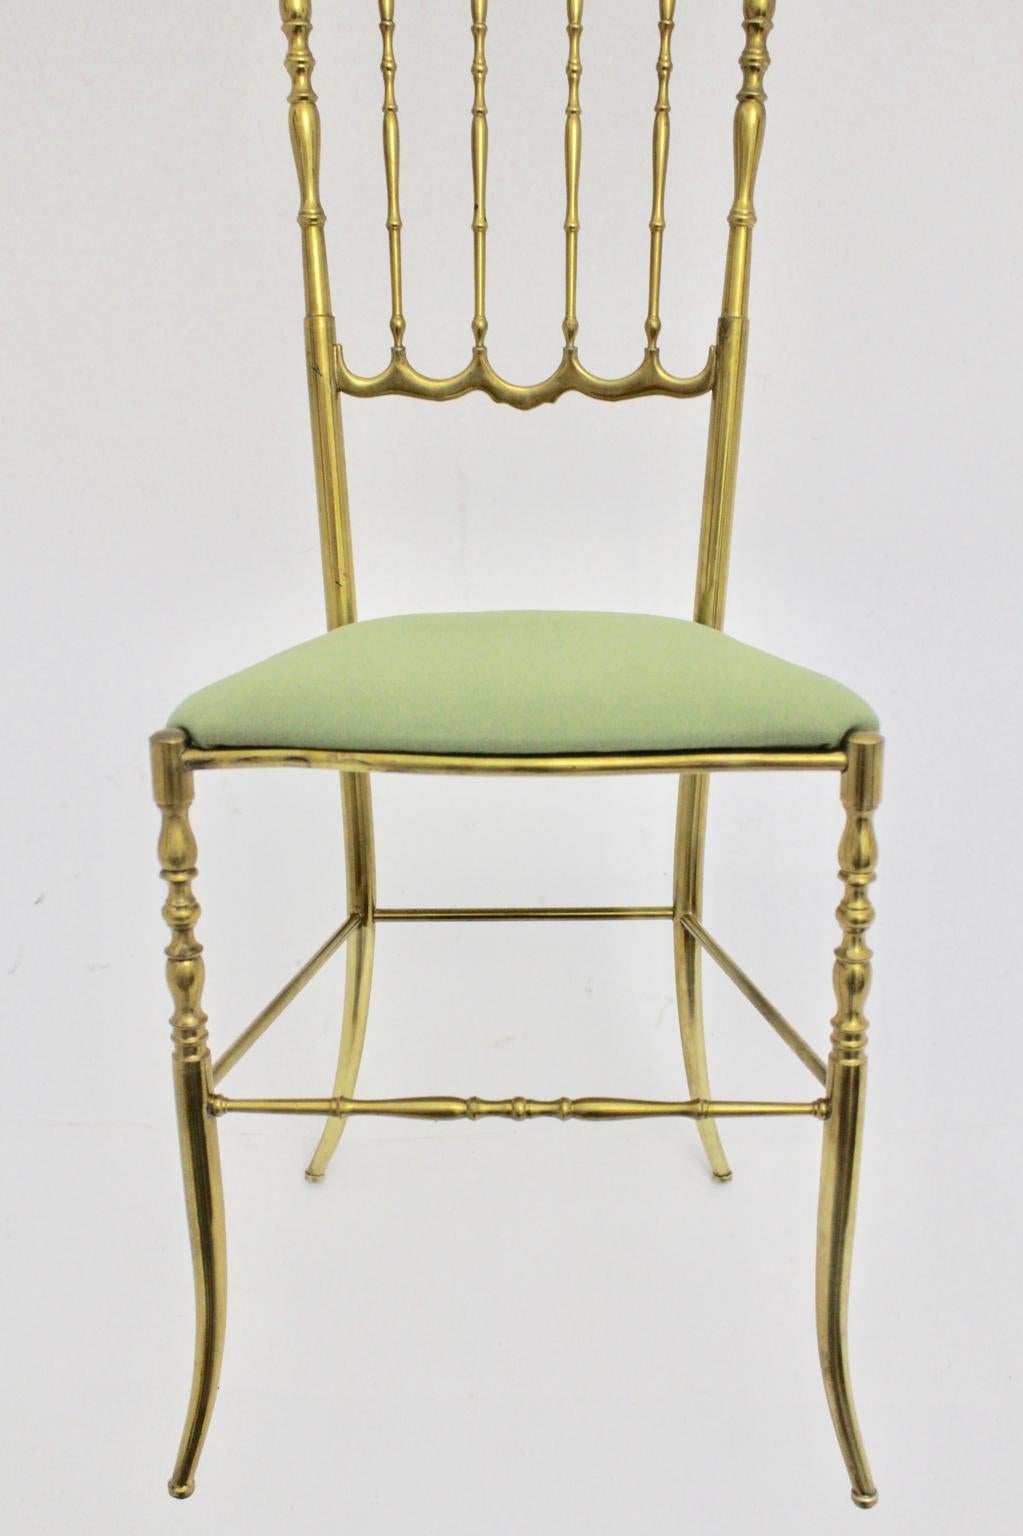 Mid-Century Modern Brass Vintage Chiavari Side Chair, 1950s, Italy For Sale 3